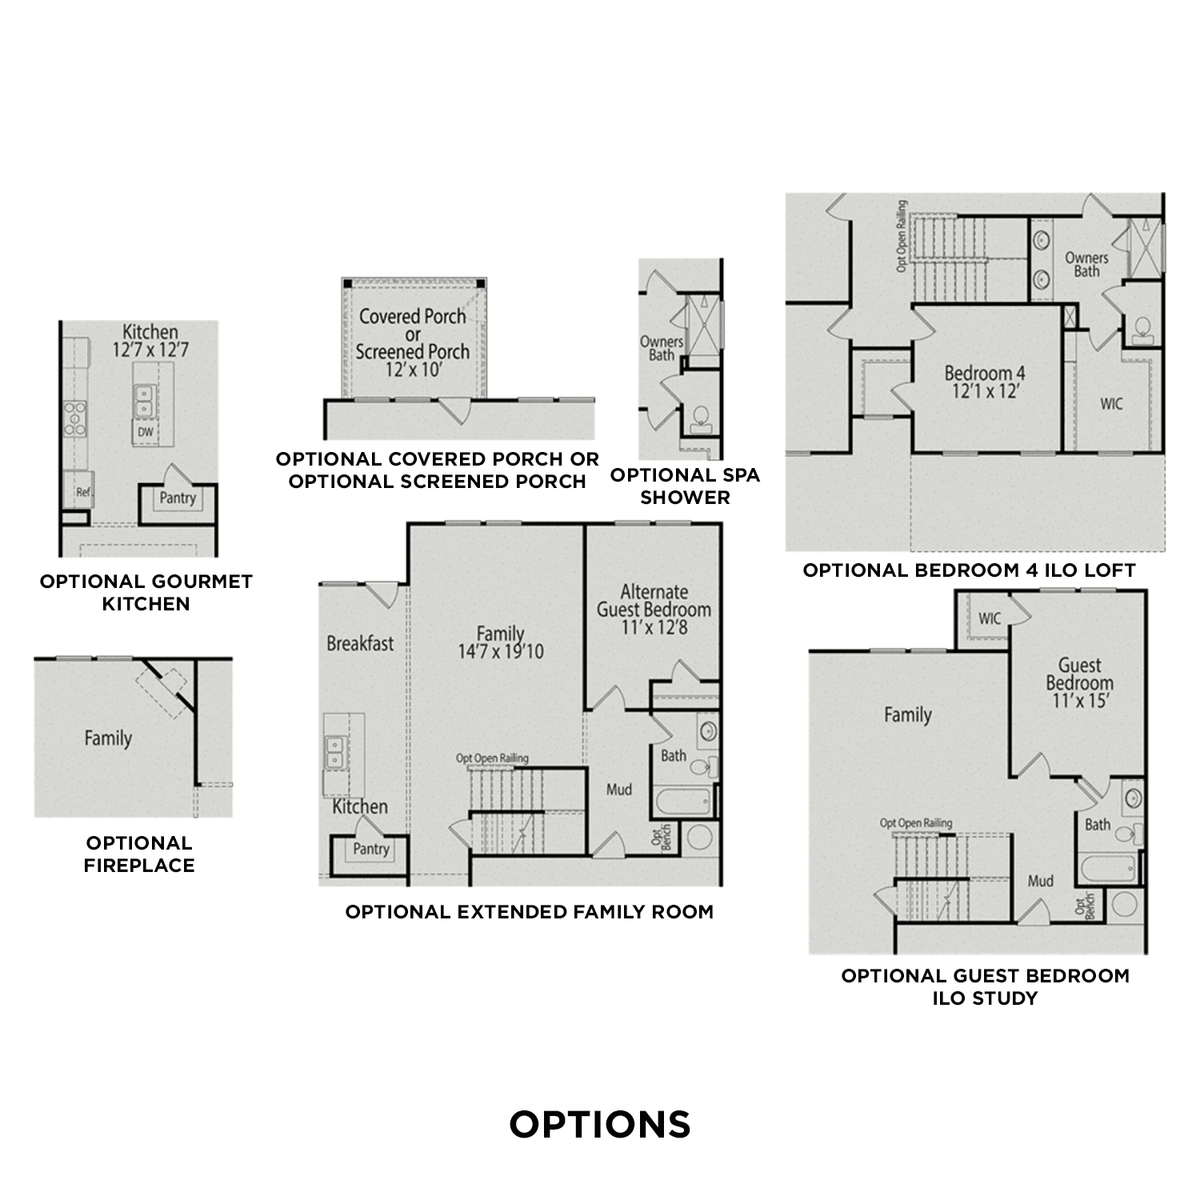 3 - The Willow B floor plan layout for 239 Northview Drive in Davidson Homes' North Creek Meadows community.